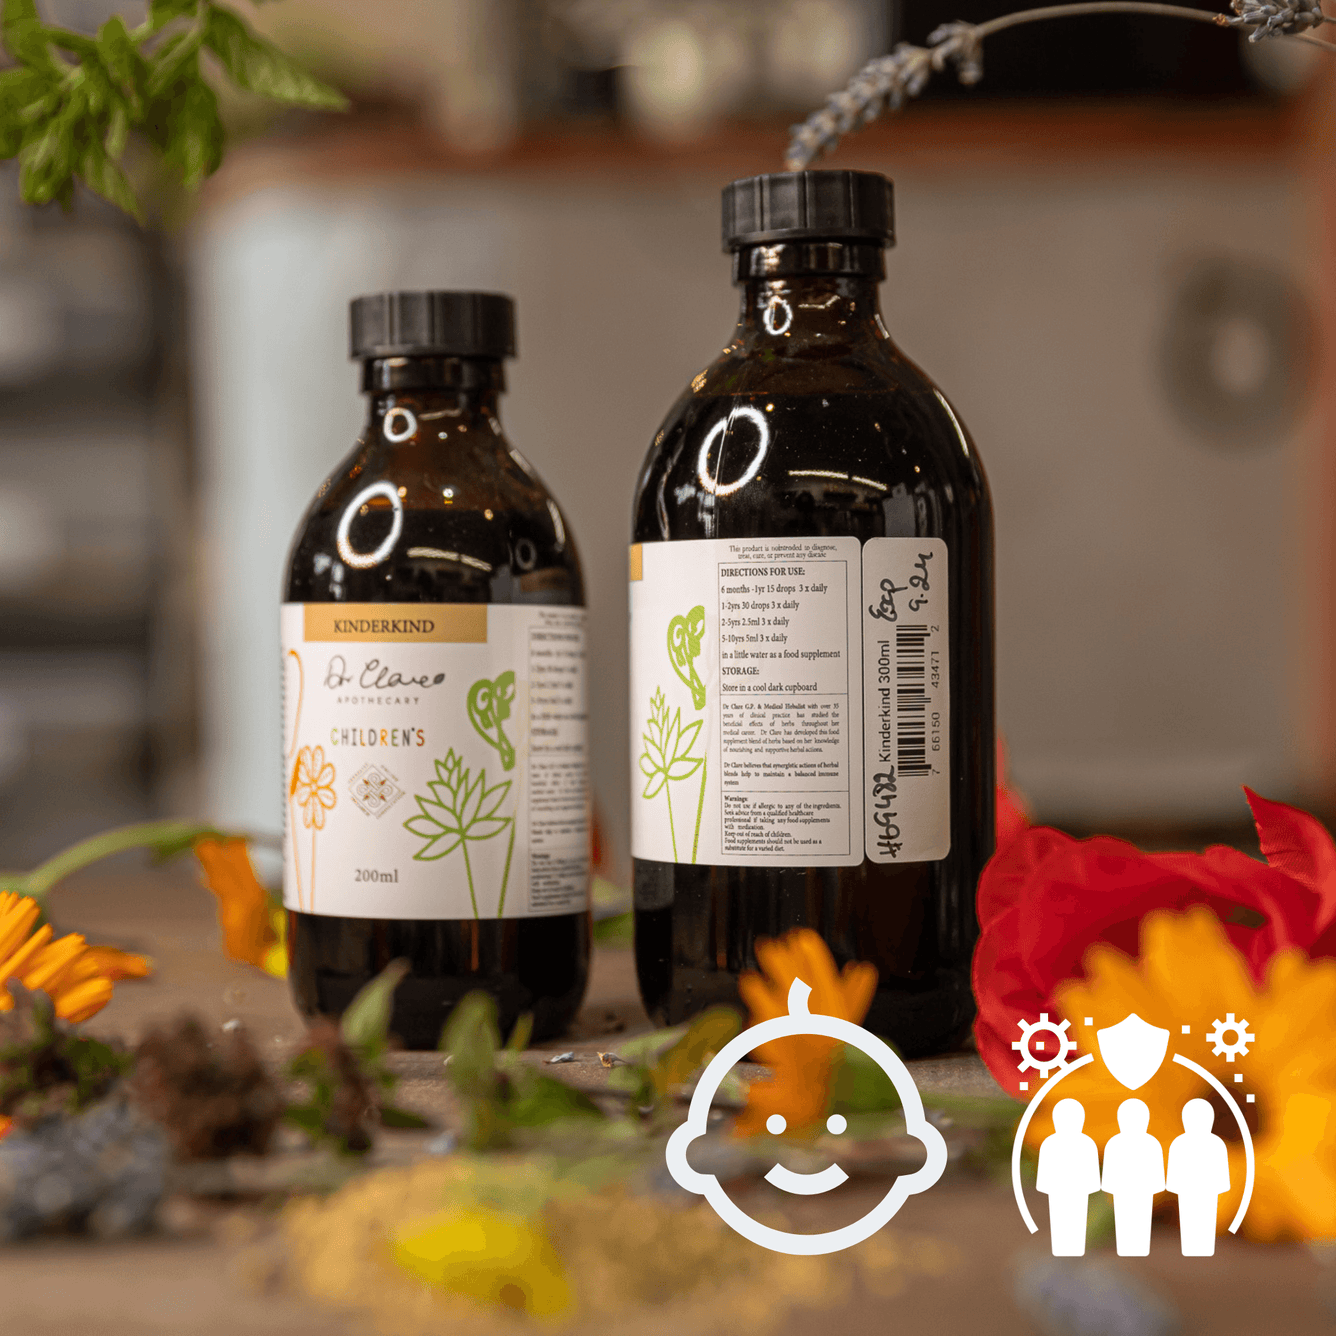 Kinderkind - DrClareApothecary